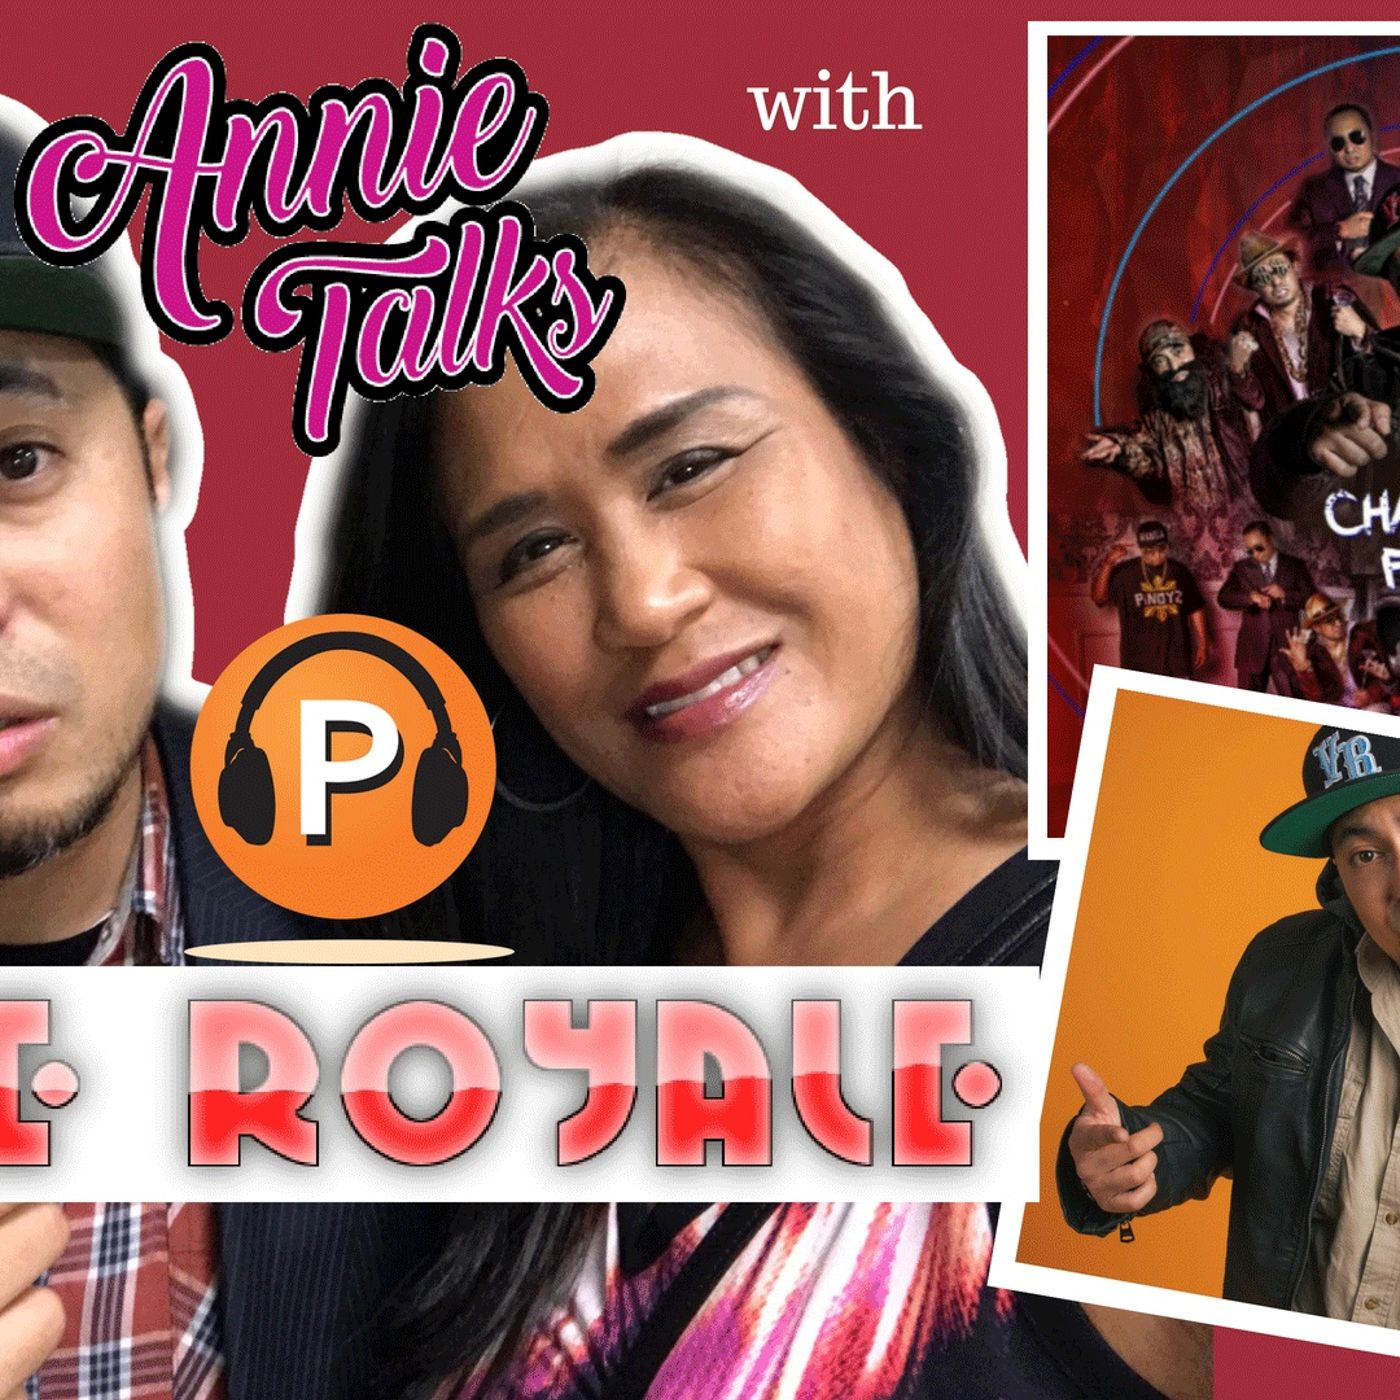 Episode 30 - Annie Talks with Comedian Vince Royale | The Art of Being a 'Social Scientist' | Charac